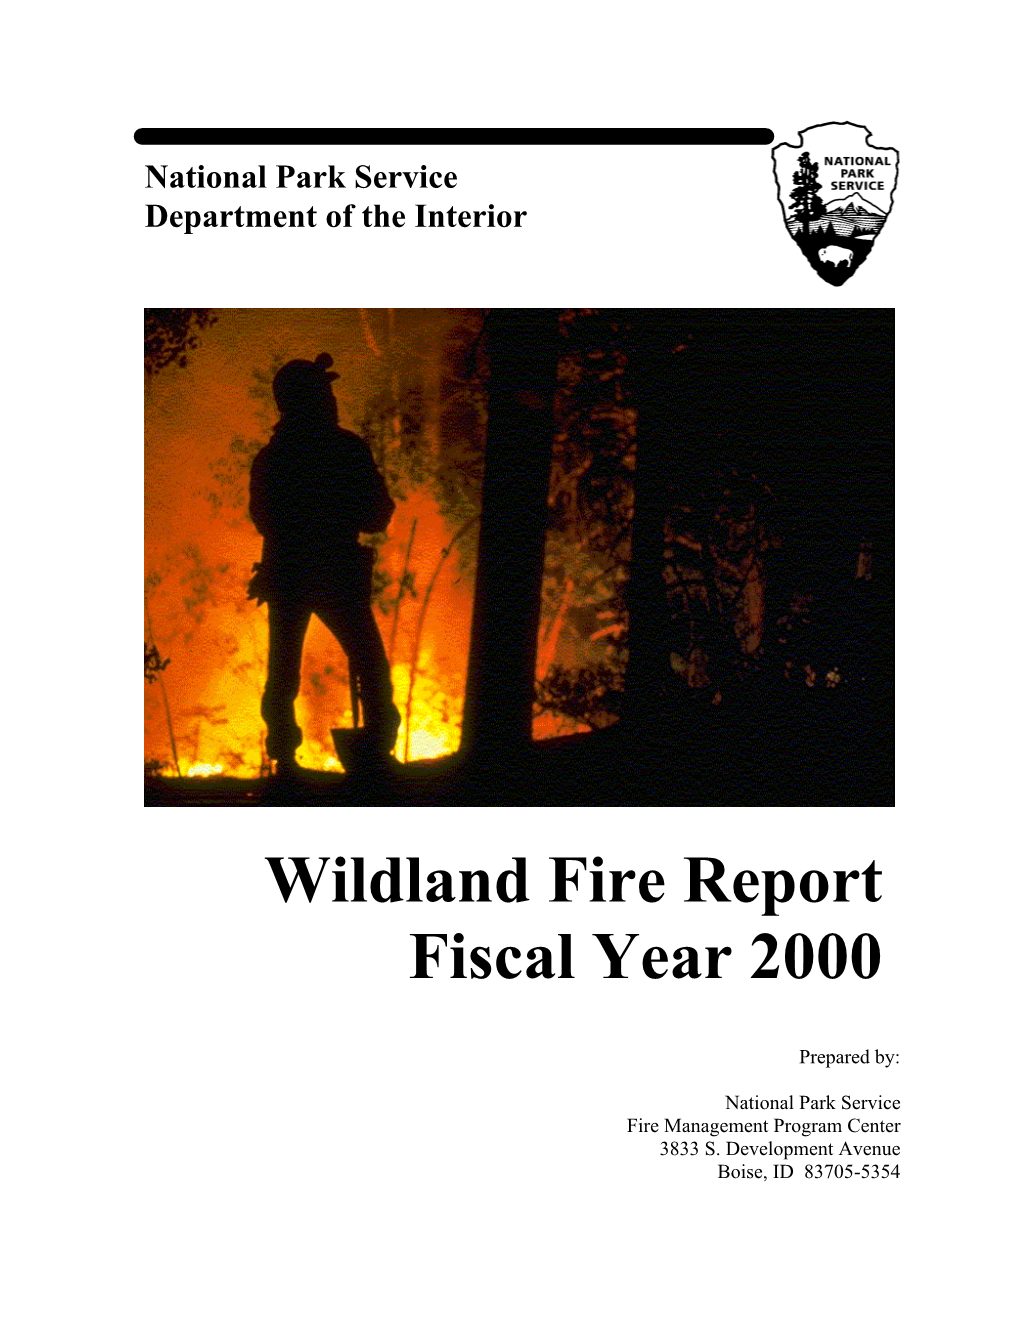 Wildland Fire Report Fiscal Year 2000